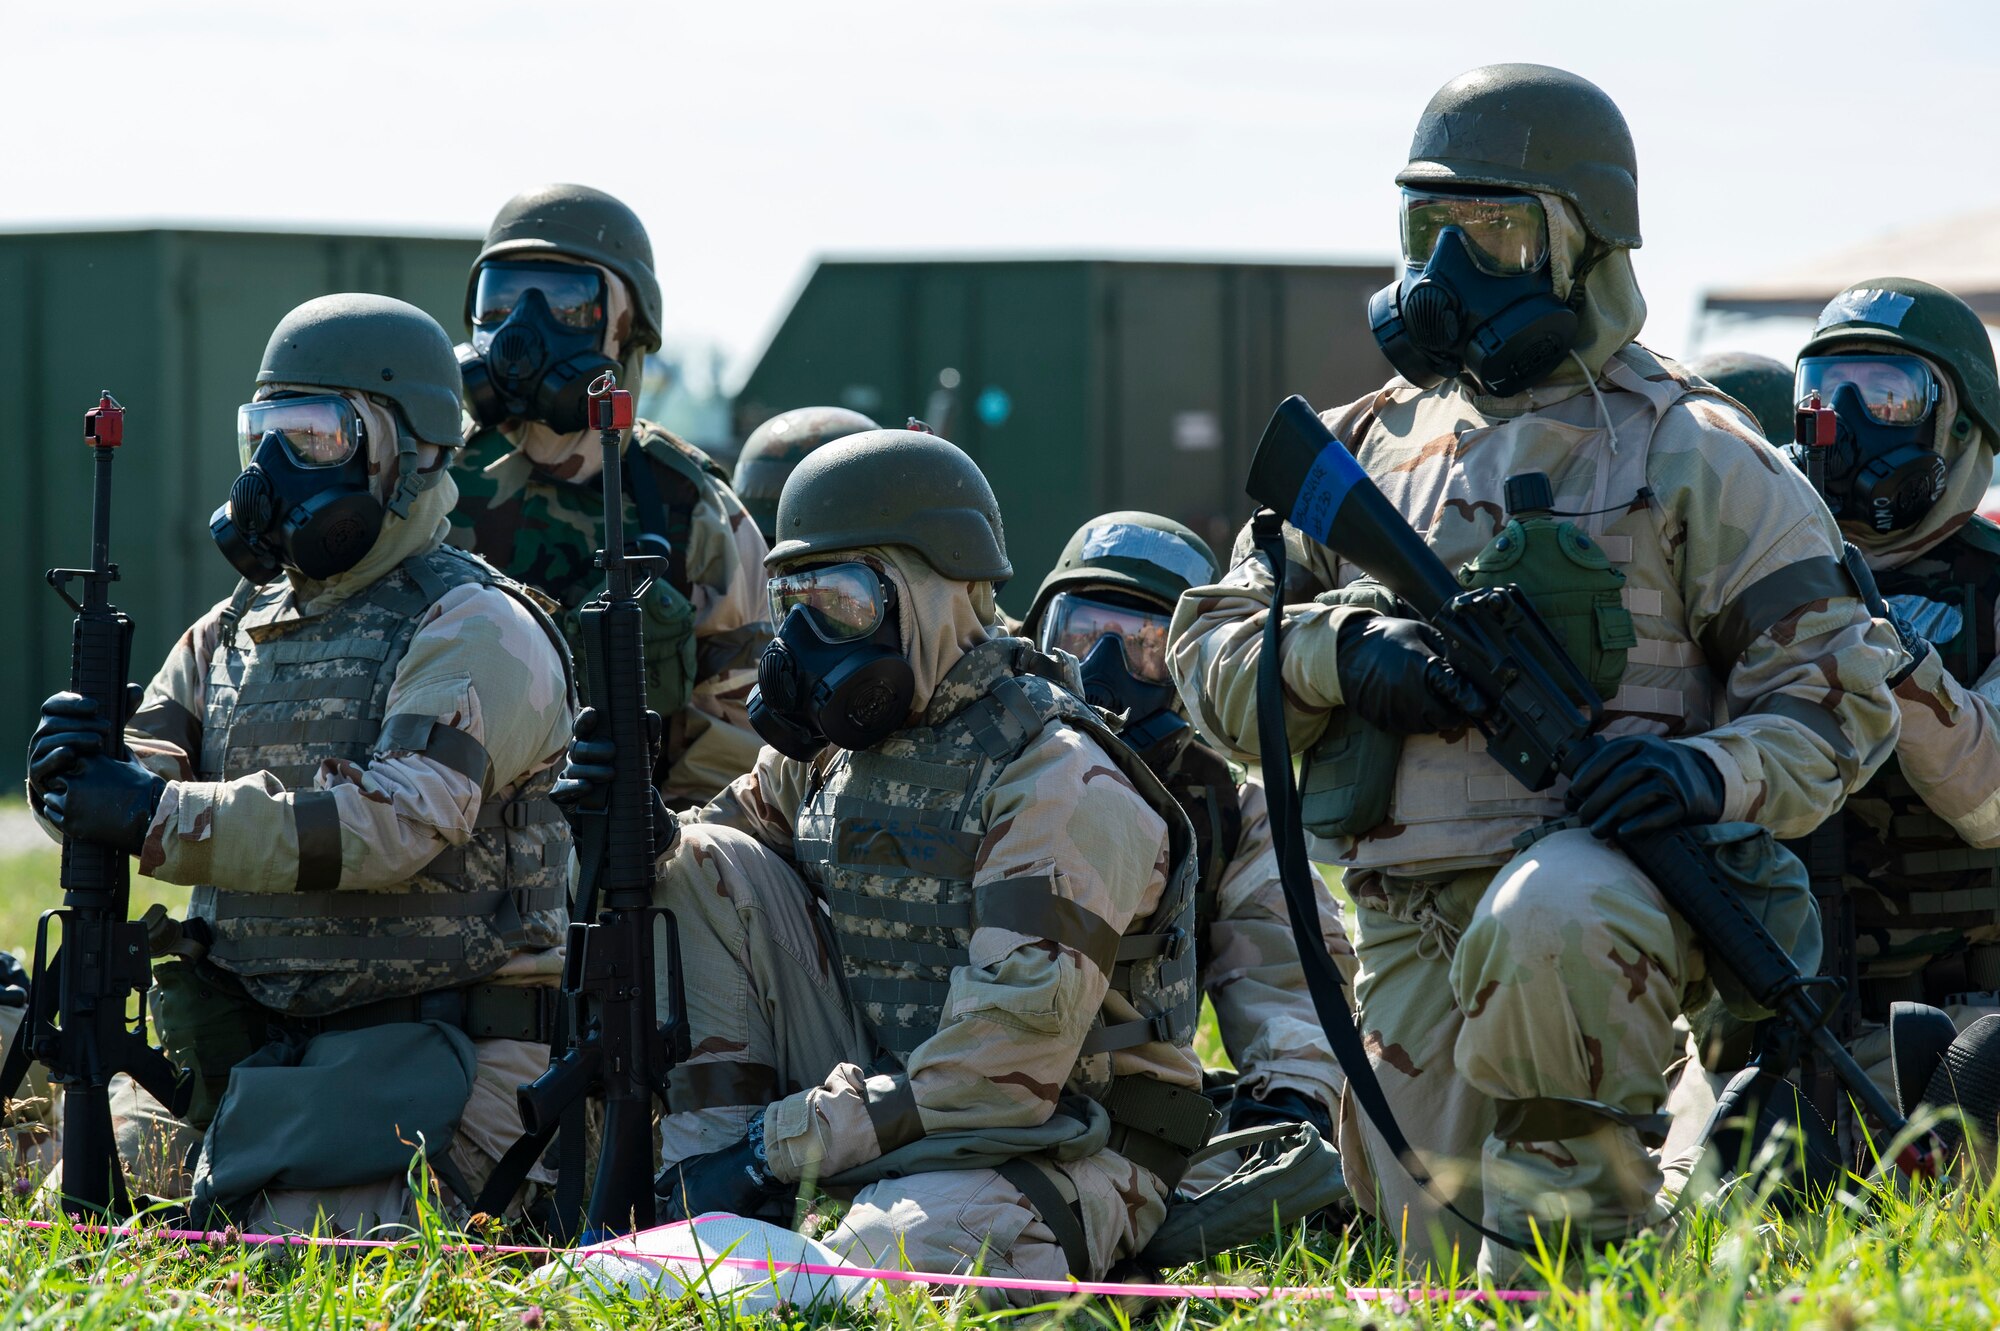 Team Dover members wearing training protective gear at a simulated forward operating base, sit in a simulated shelter during Liberty Eagle Readiness Exercise 2022 at Dover Air Force Base, Delaware, July 13, 2022. The 436th and 512th Airlift Wings tested their ability to generate, employ and sustain airpower across the world in a contested and degraded operational environment. (U.S. Air Force photo by Roland Balik)